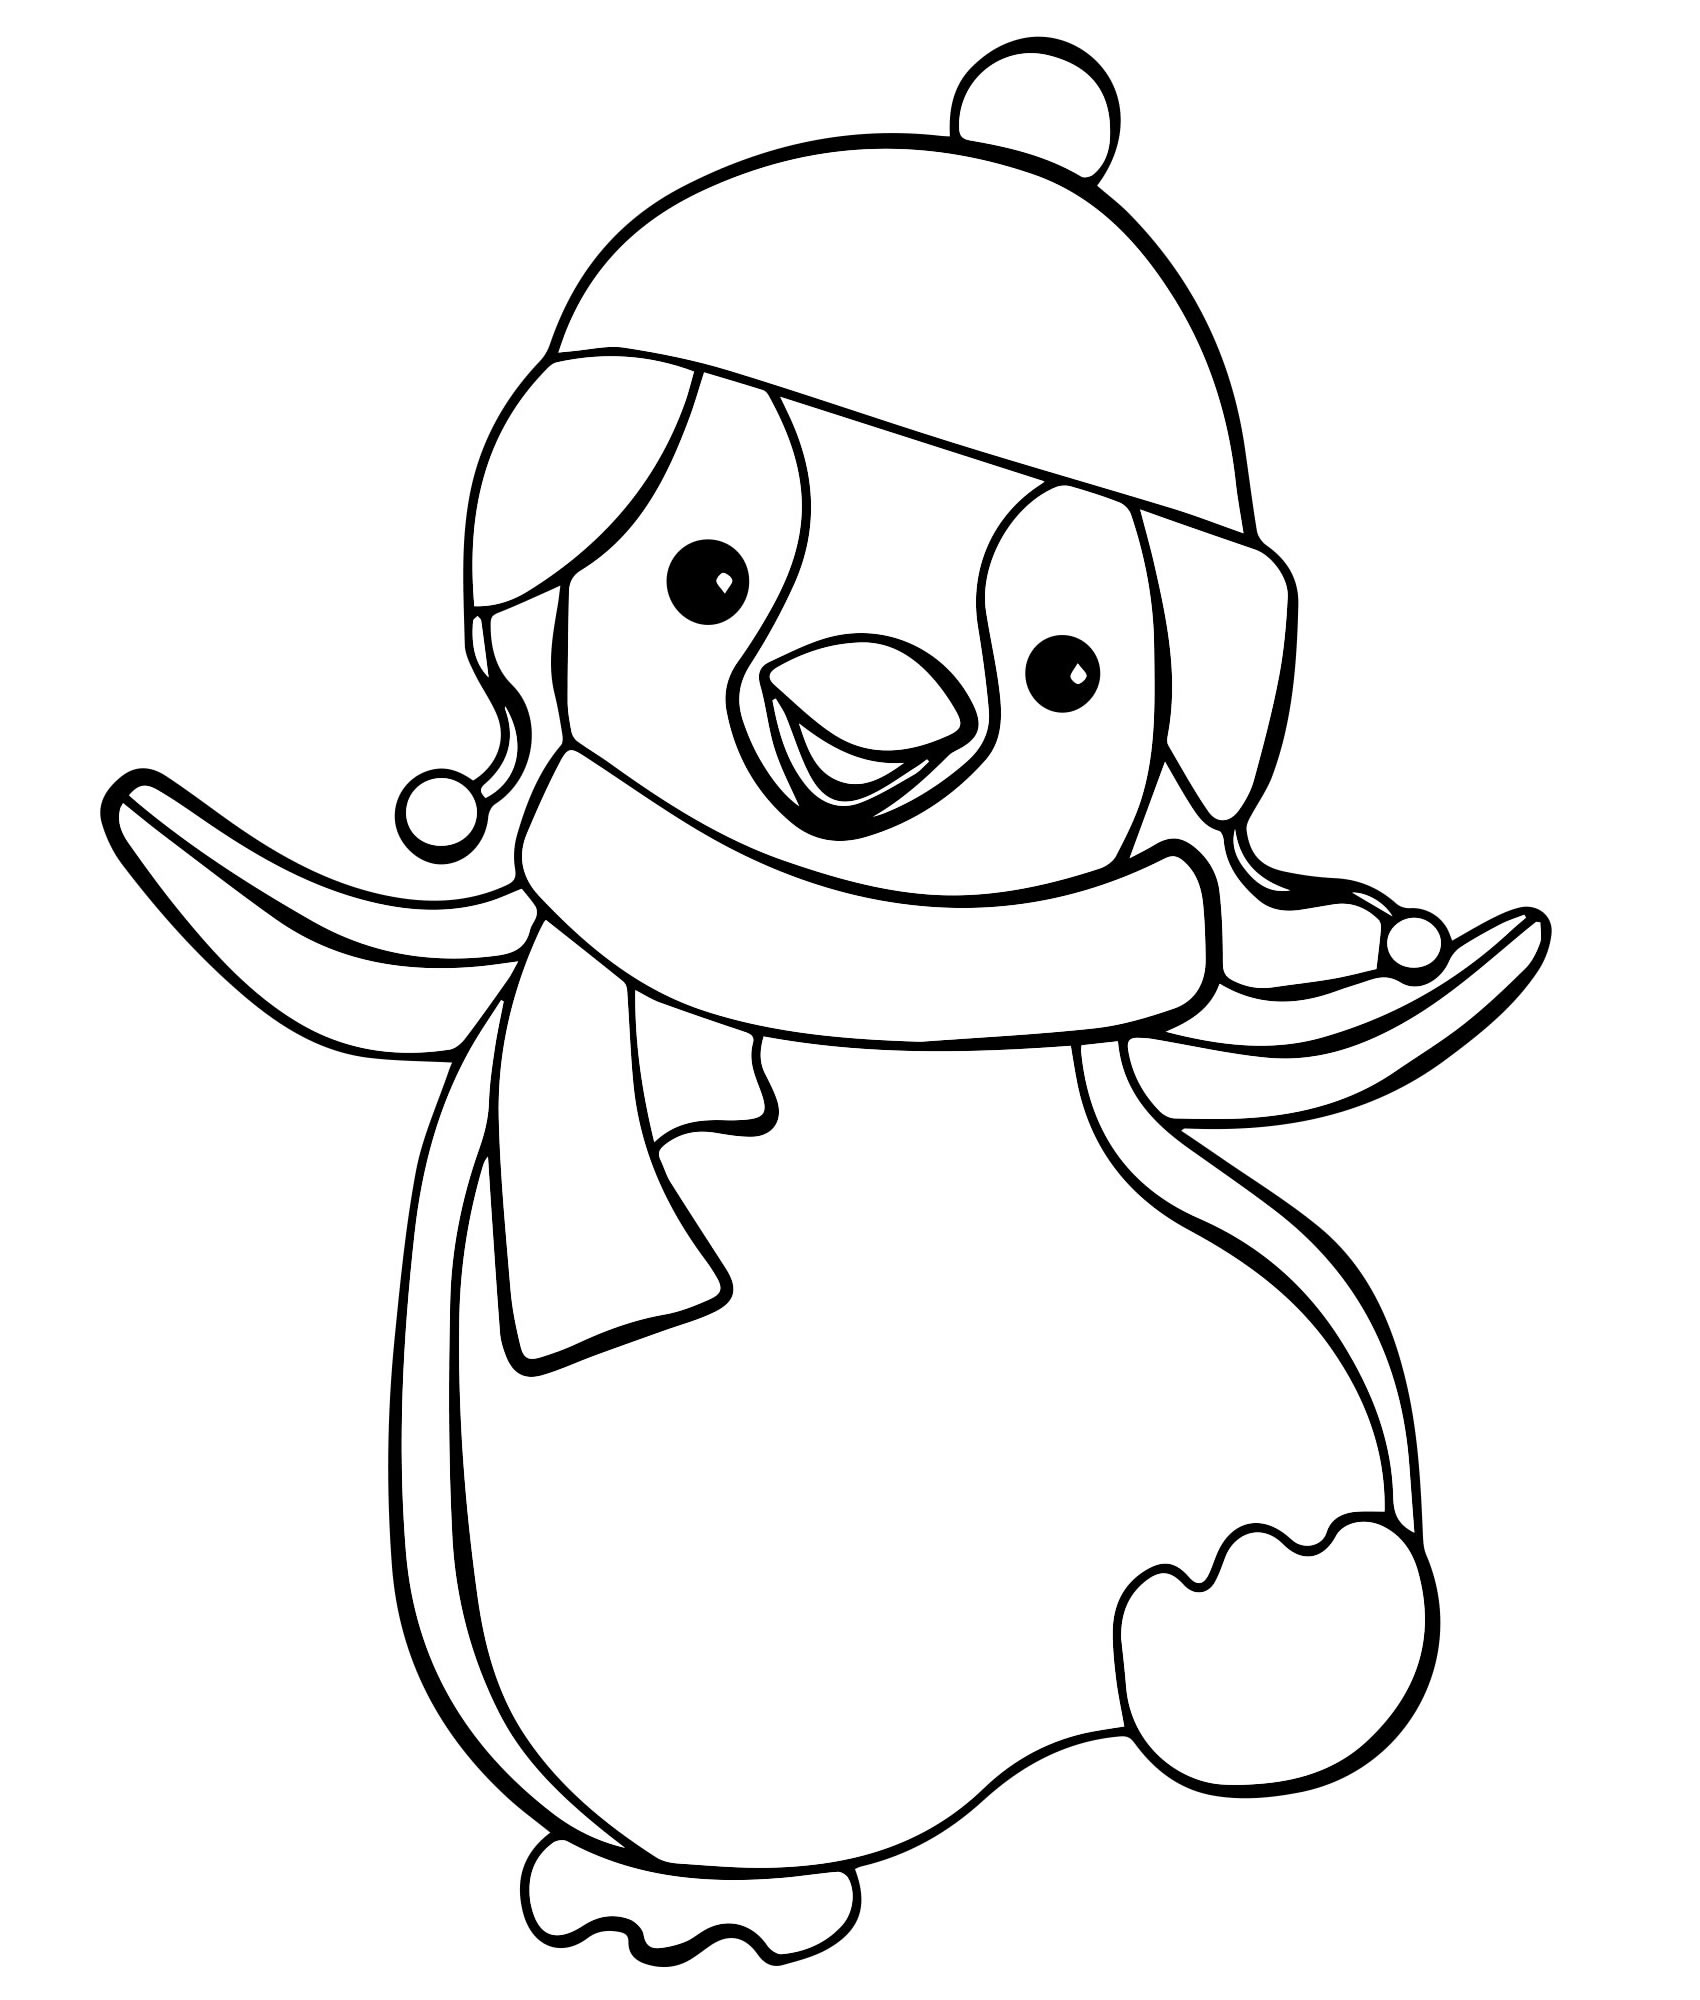 Penguin | Coloring book for children: 24 coloring pages